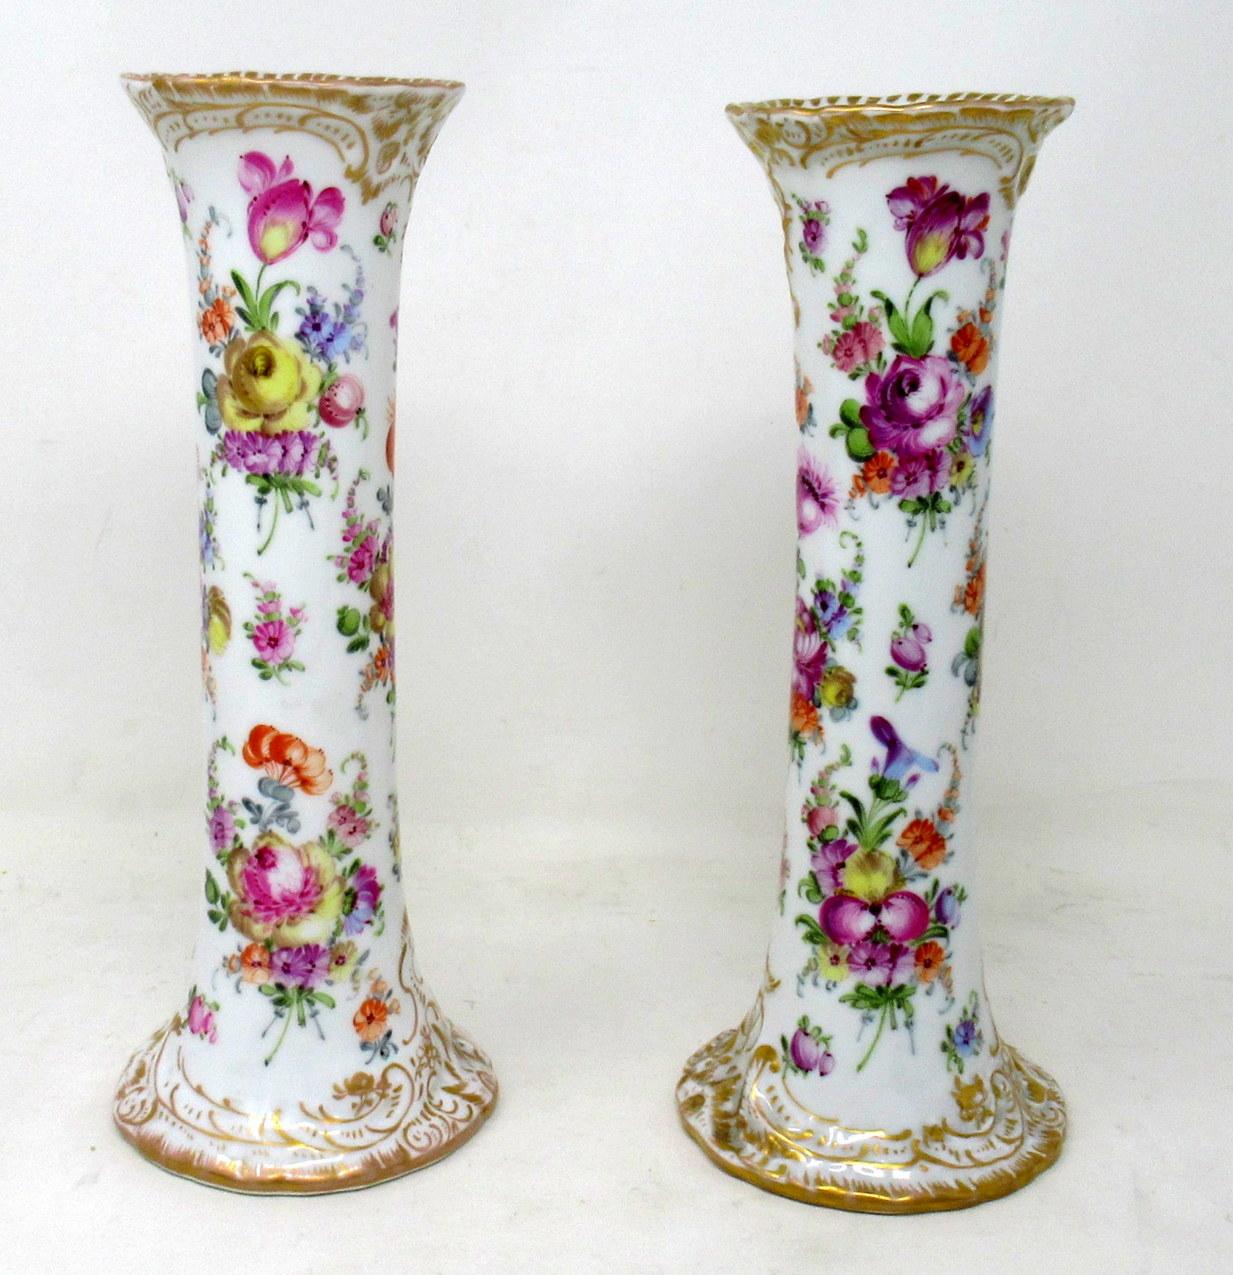 Fine pair of hand painted German hard paste dresden porcelain tall flaring trumpet mantle or desk vases, late nineteenth early twentieth century.

Each with a spiral body rising from a circular spreading gilt base to a flaring rim. The entire